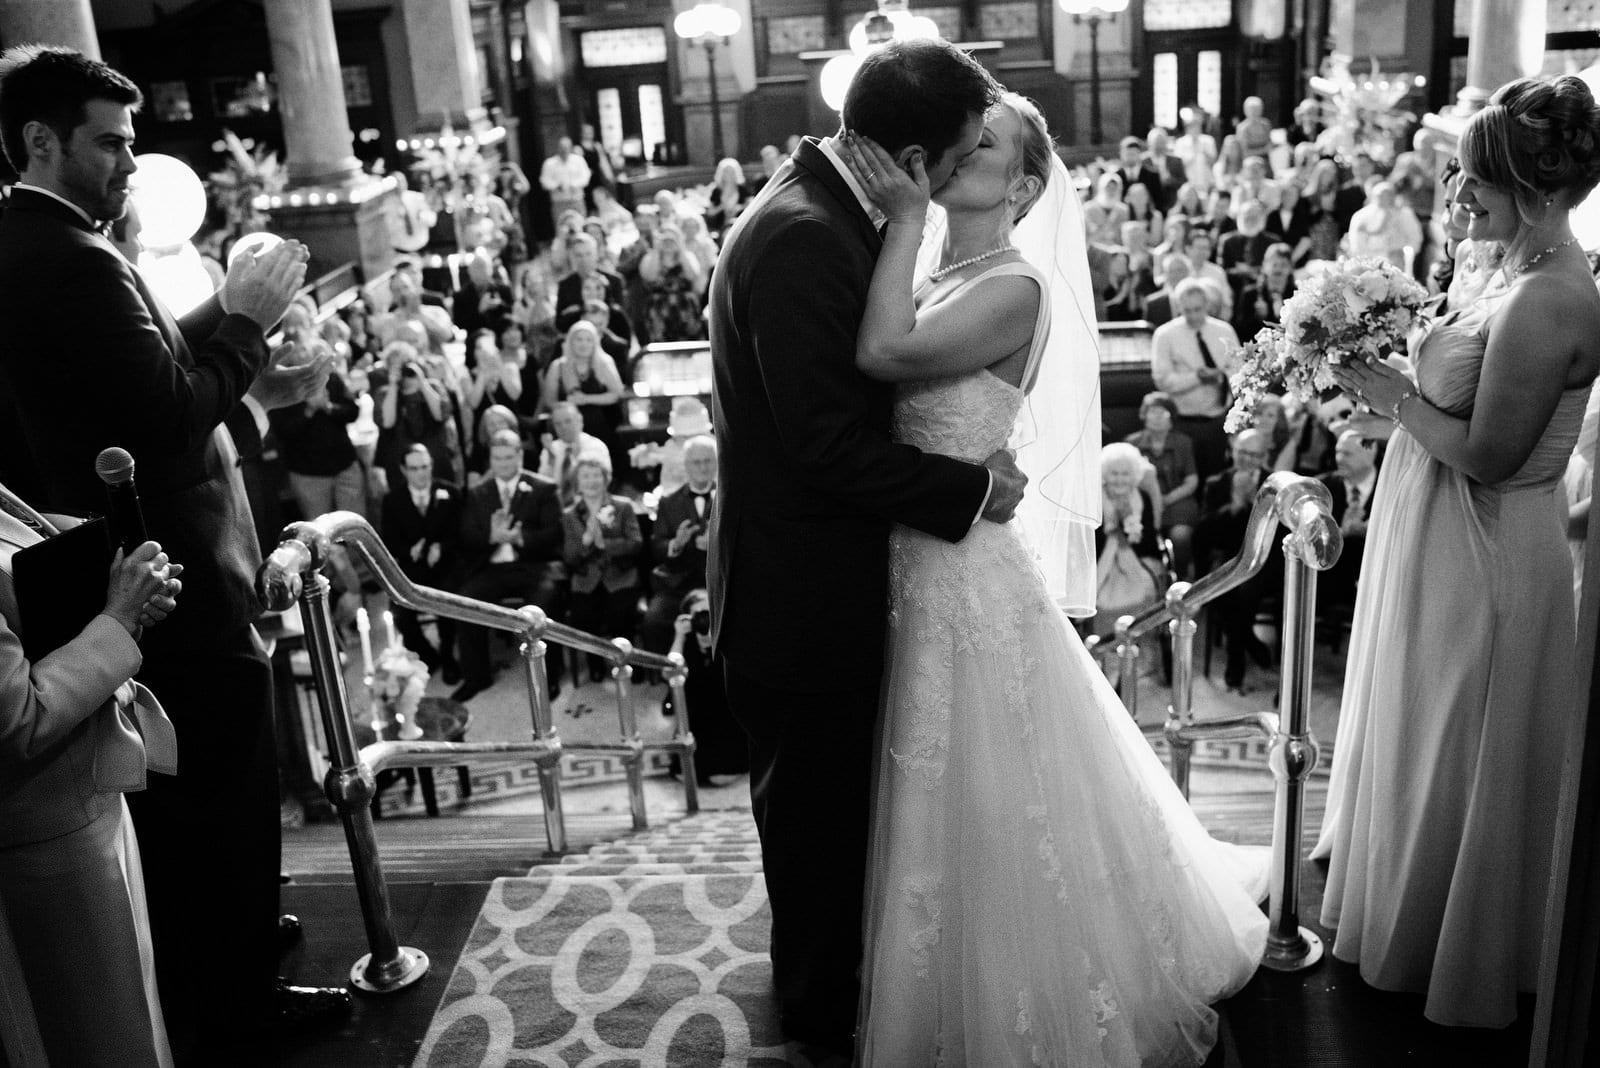 A bride and groom kiss on the landing of the Grand Concourse at the end of their wedding ceremony as their guests and bridal party behind them applaud.